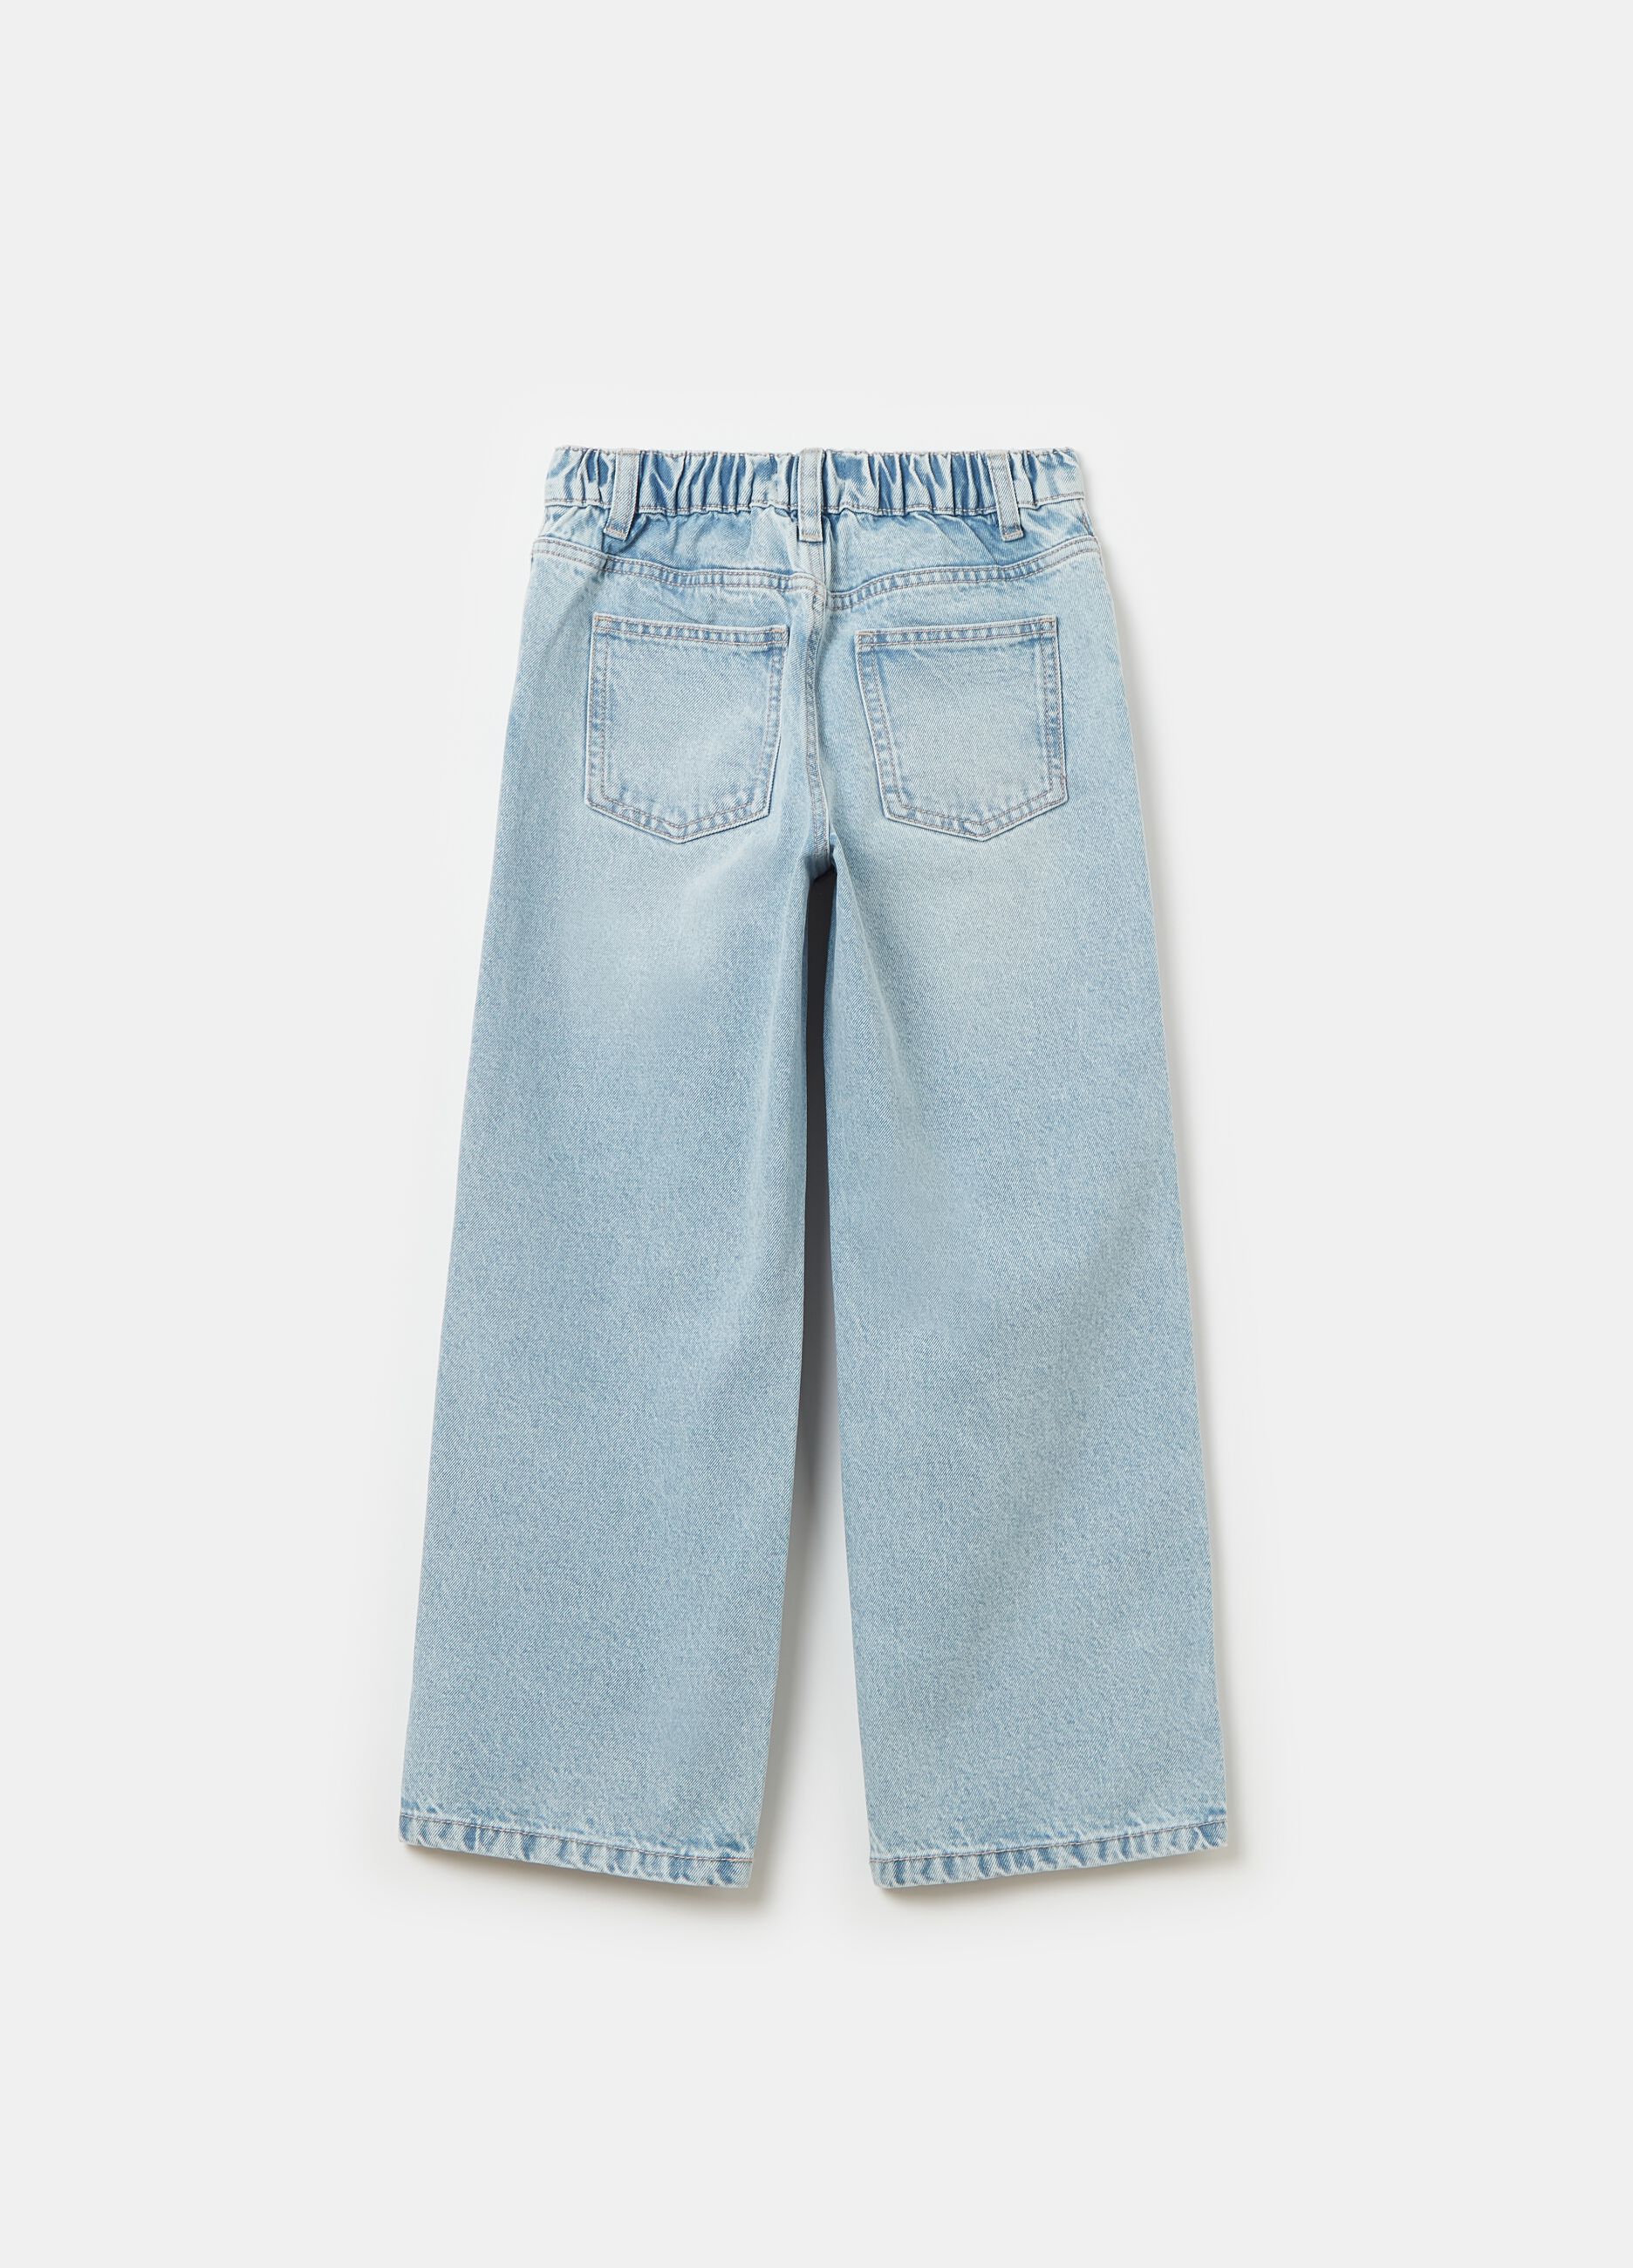 Culotte-style jeans with five pockets